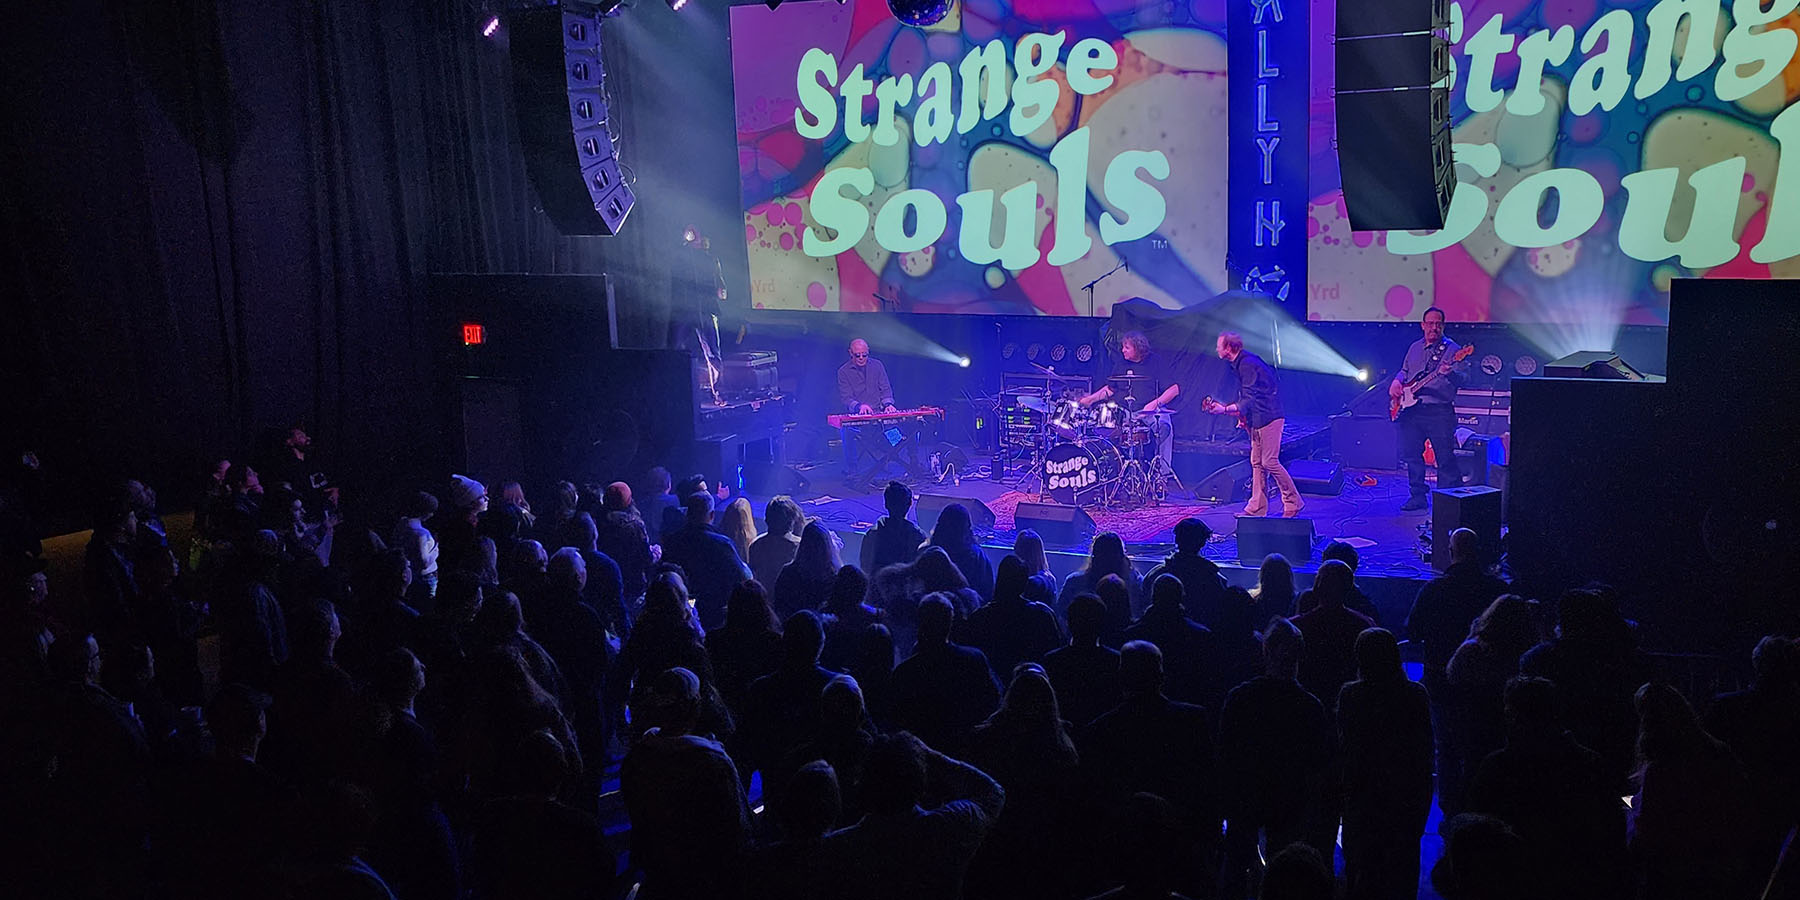 Strange Souls: The Doors Reimagined at Tally Ho Theater